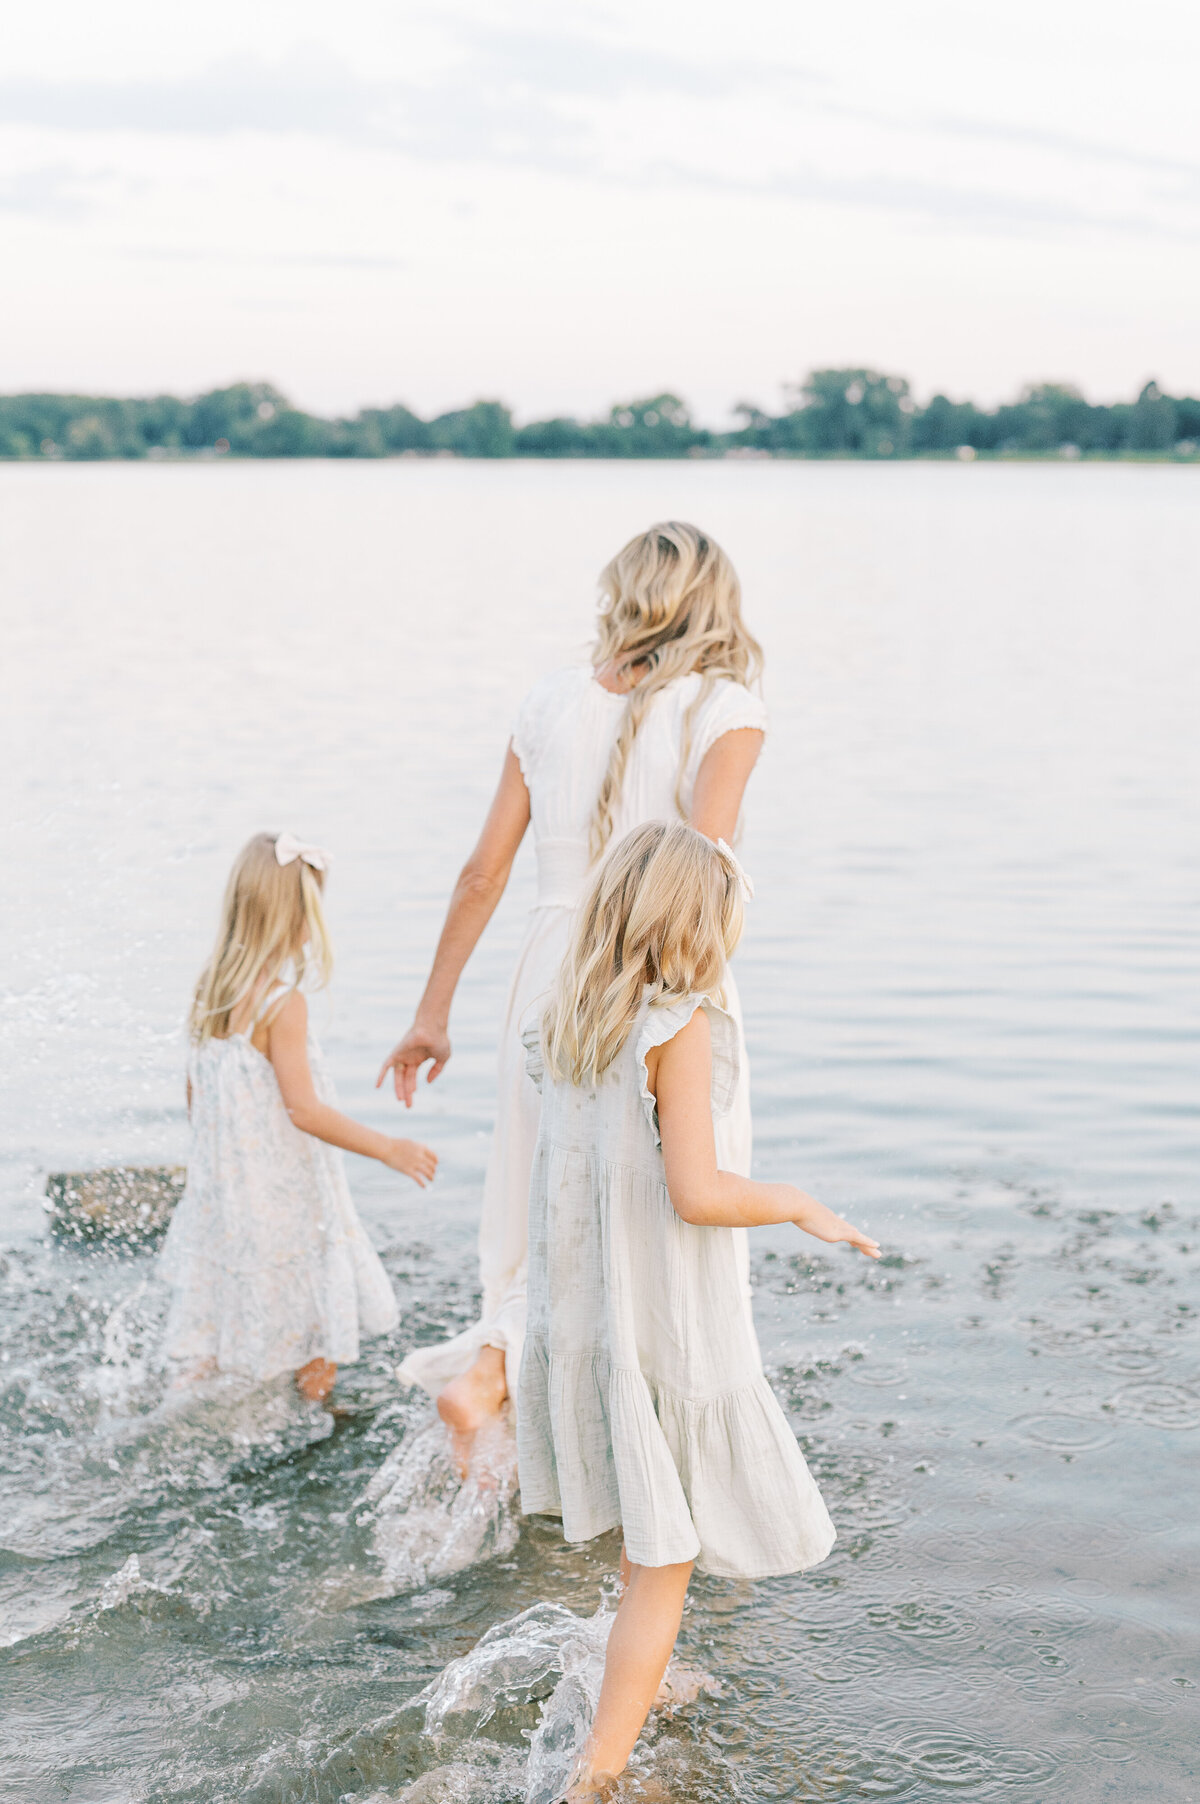 Mom walking with daughters into lake hand in hand